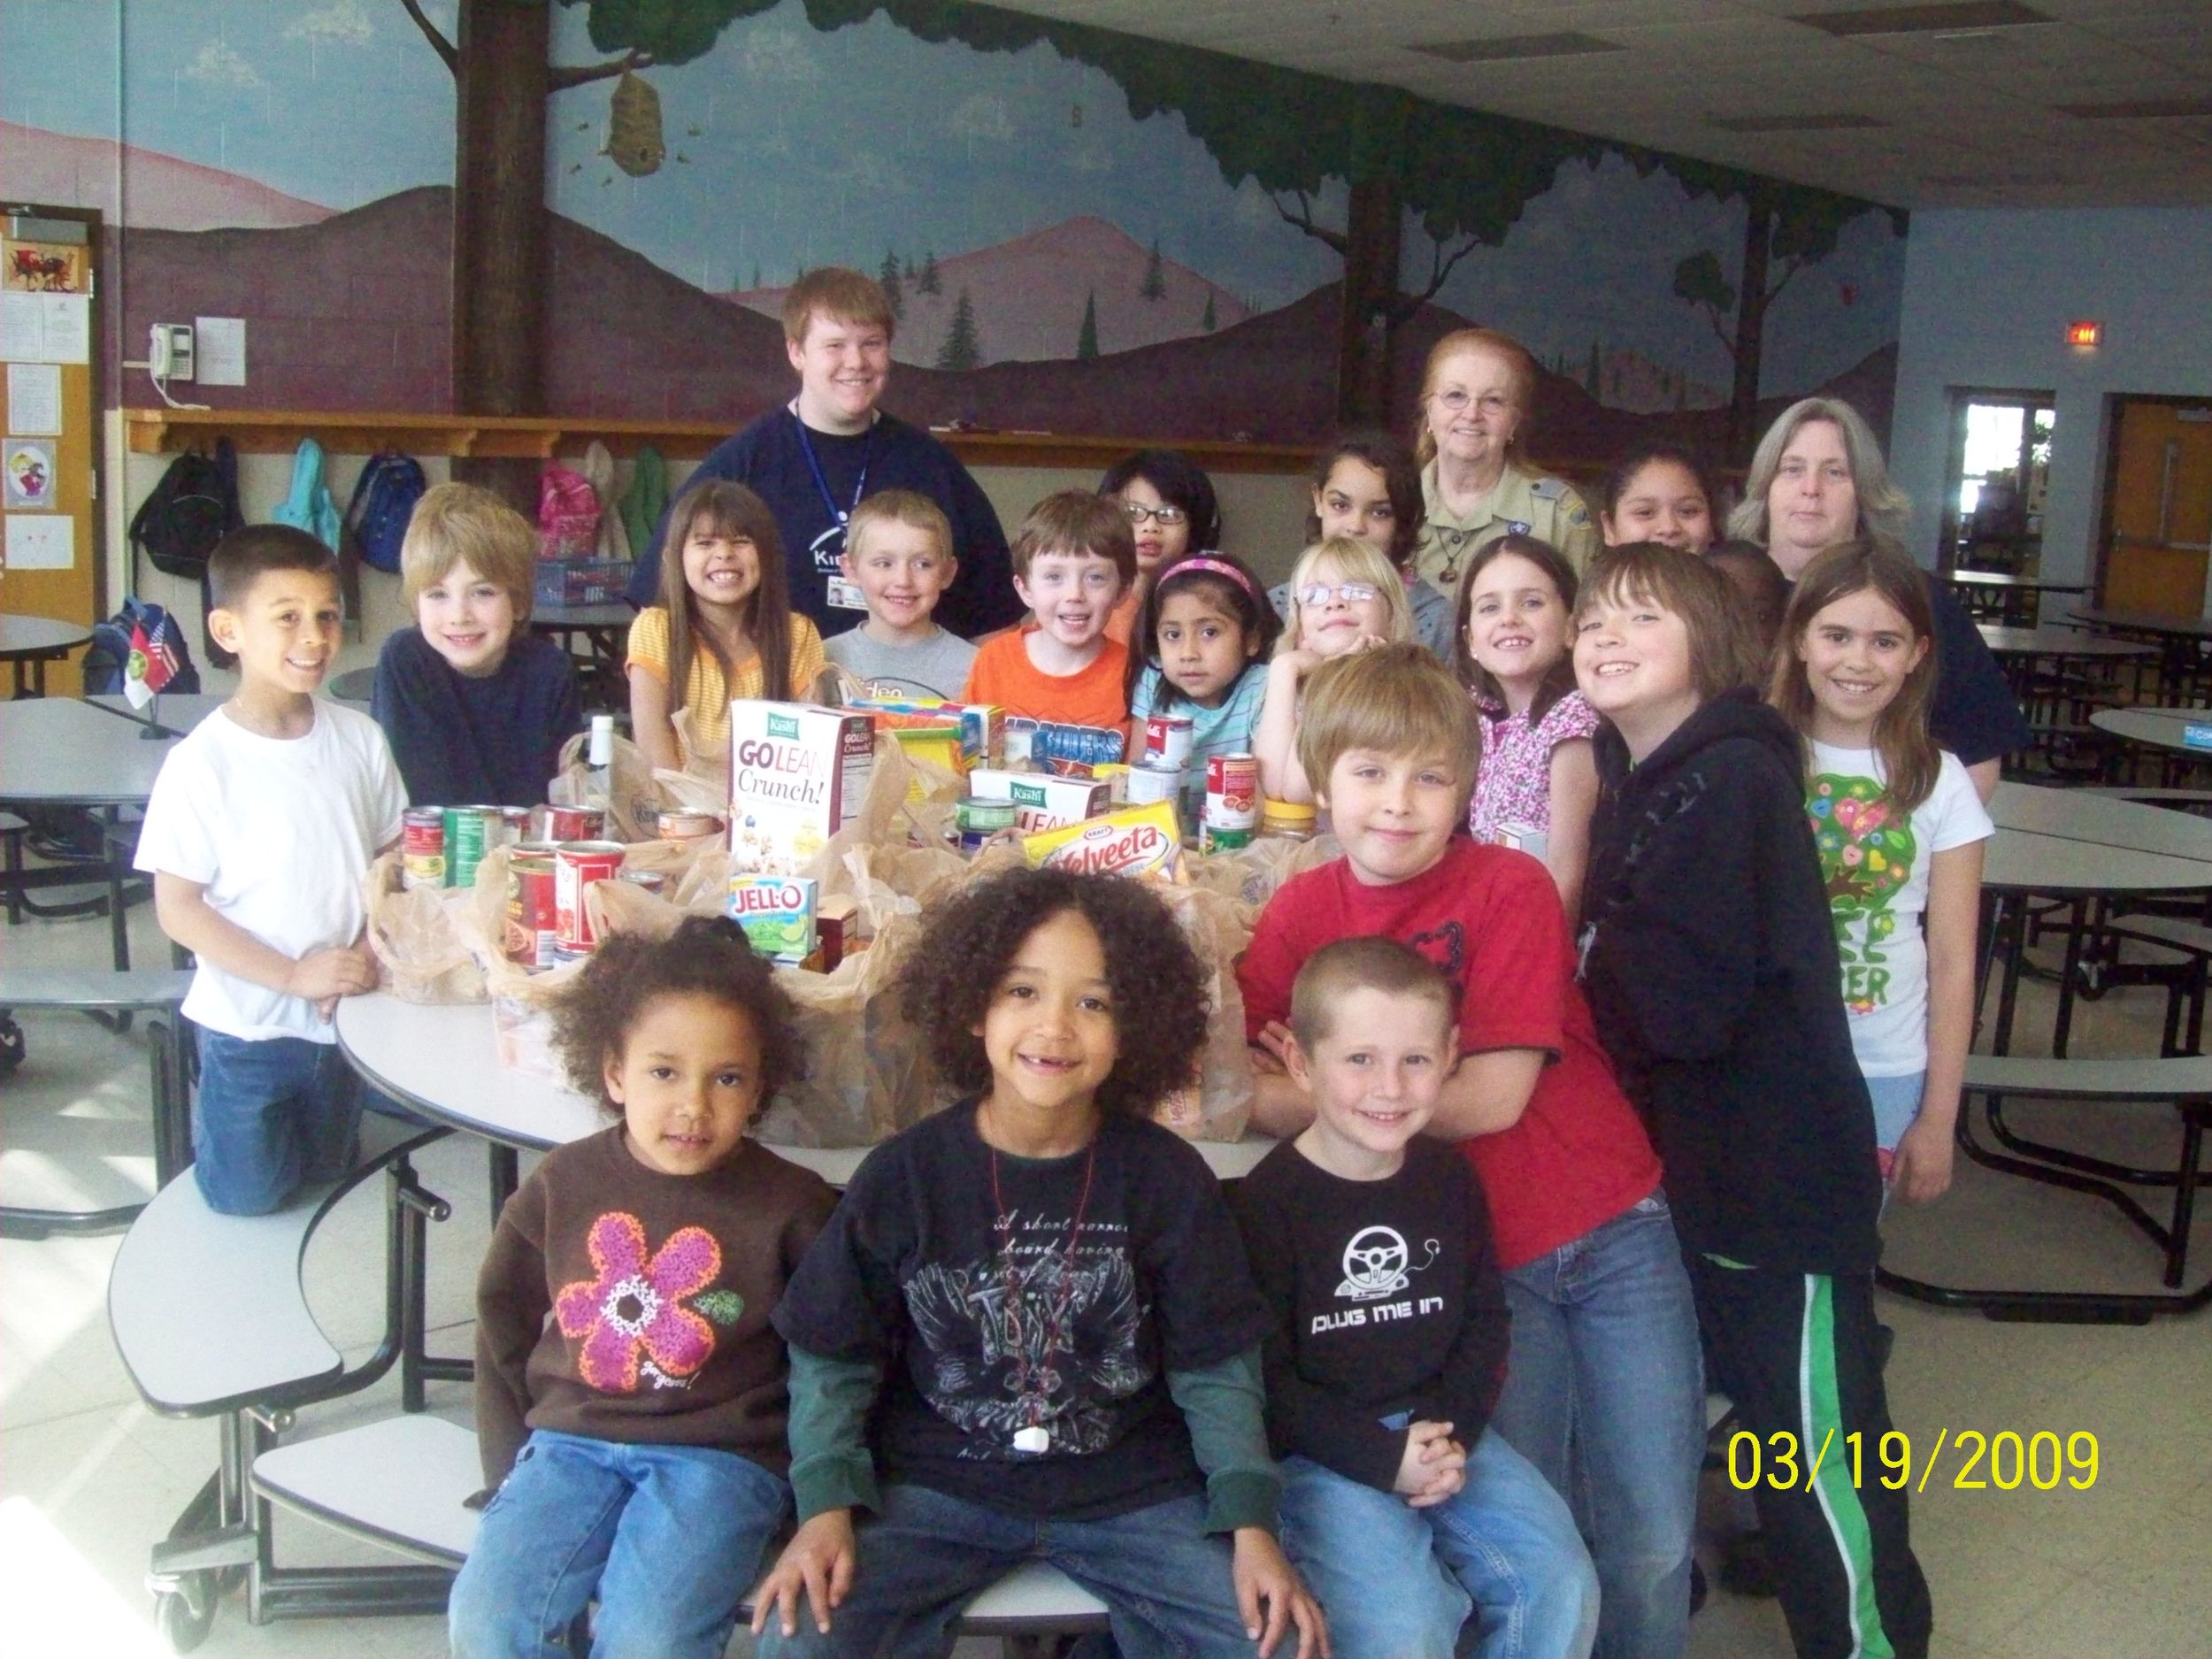  In 2009, these Goshen youngsters held their own food drive which they donated to The Window. Great Job Guys!   